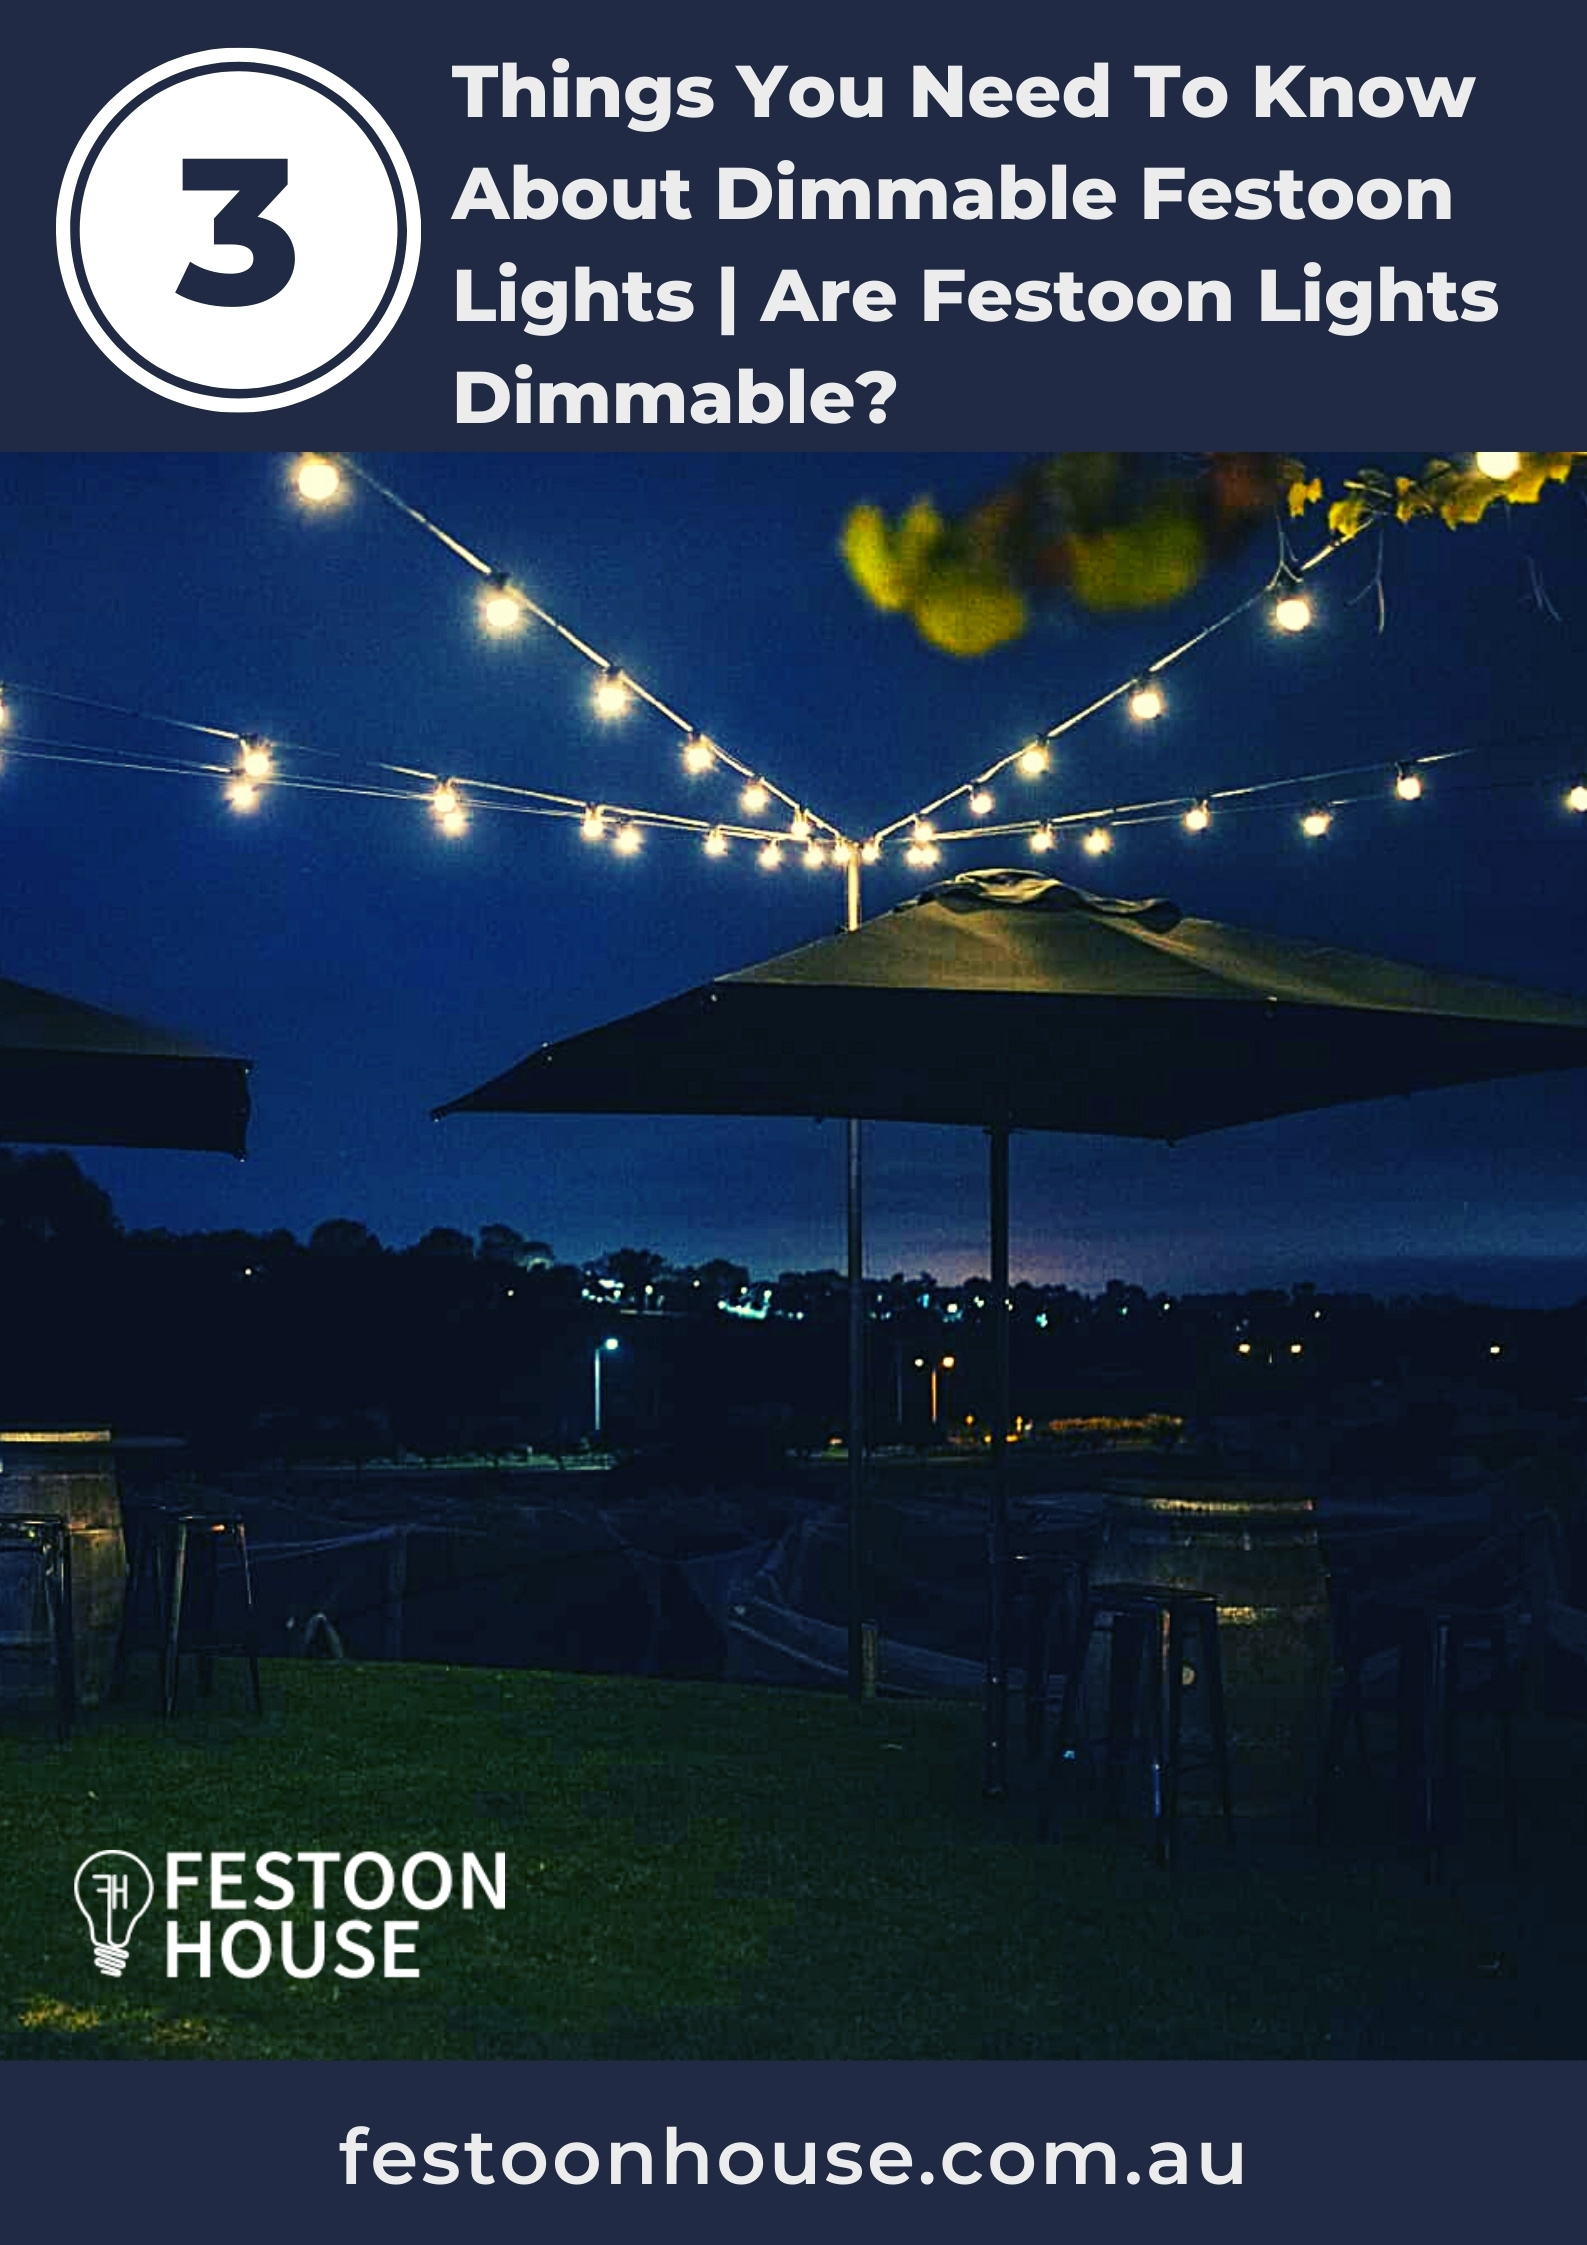 3 Things You Need To Know About Dimmable Festoon Lights | Are Festoon Lights Dimmable? 